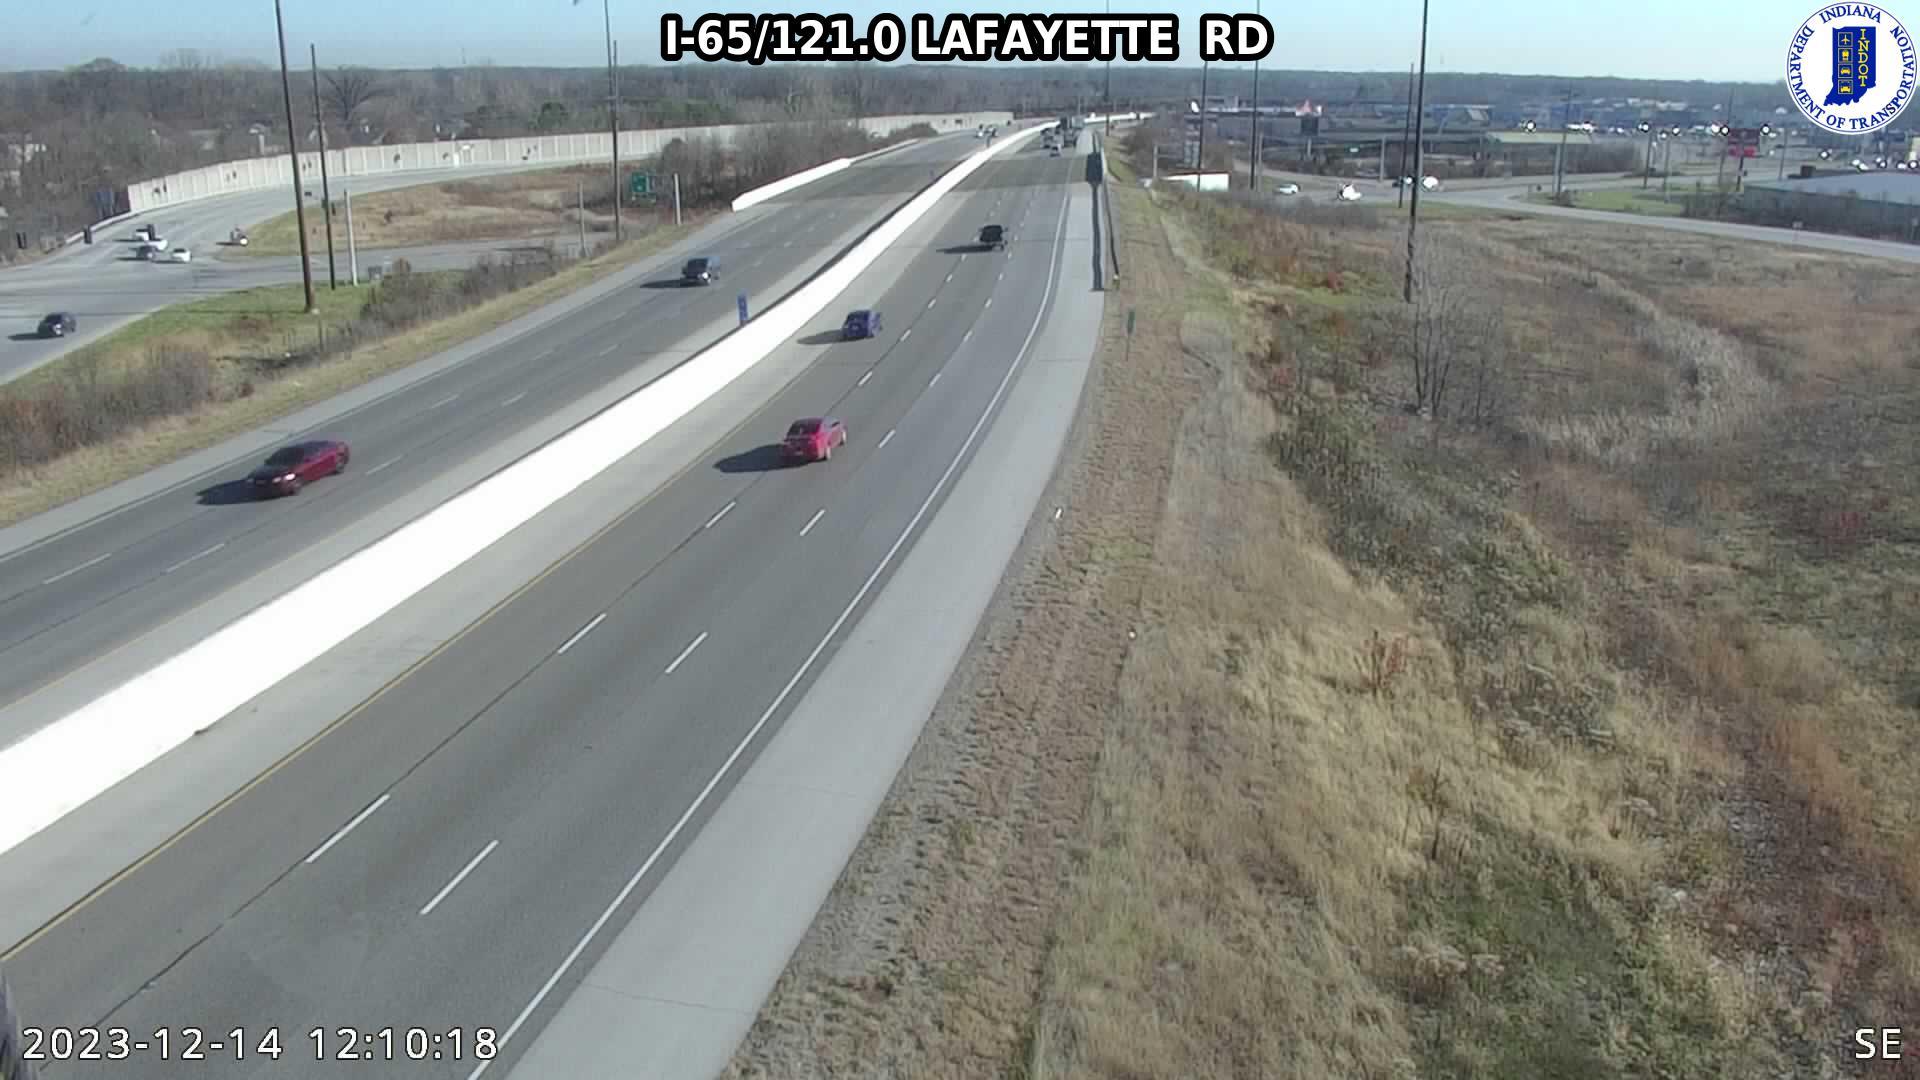 Traffic Cam Indianapolis: I-65: I-65/121.0 LAFAYETTE RD Player